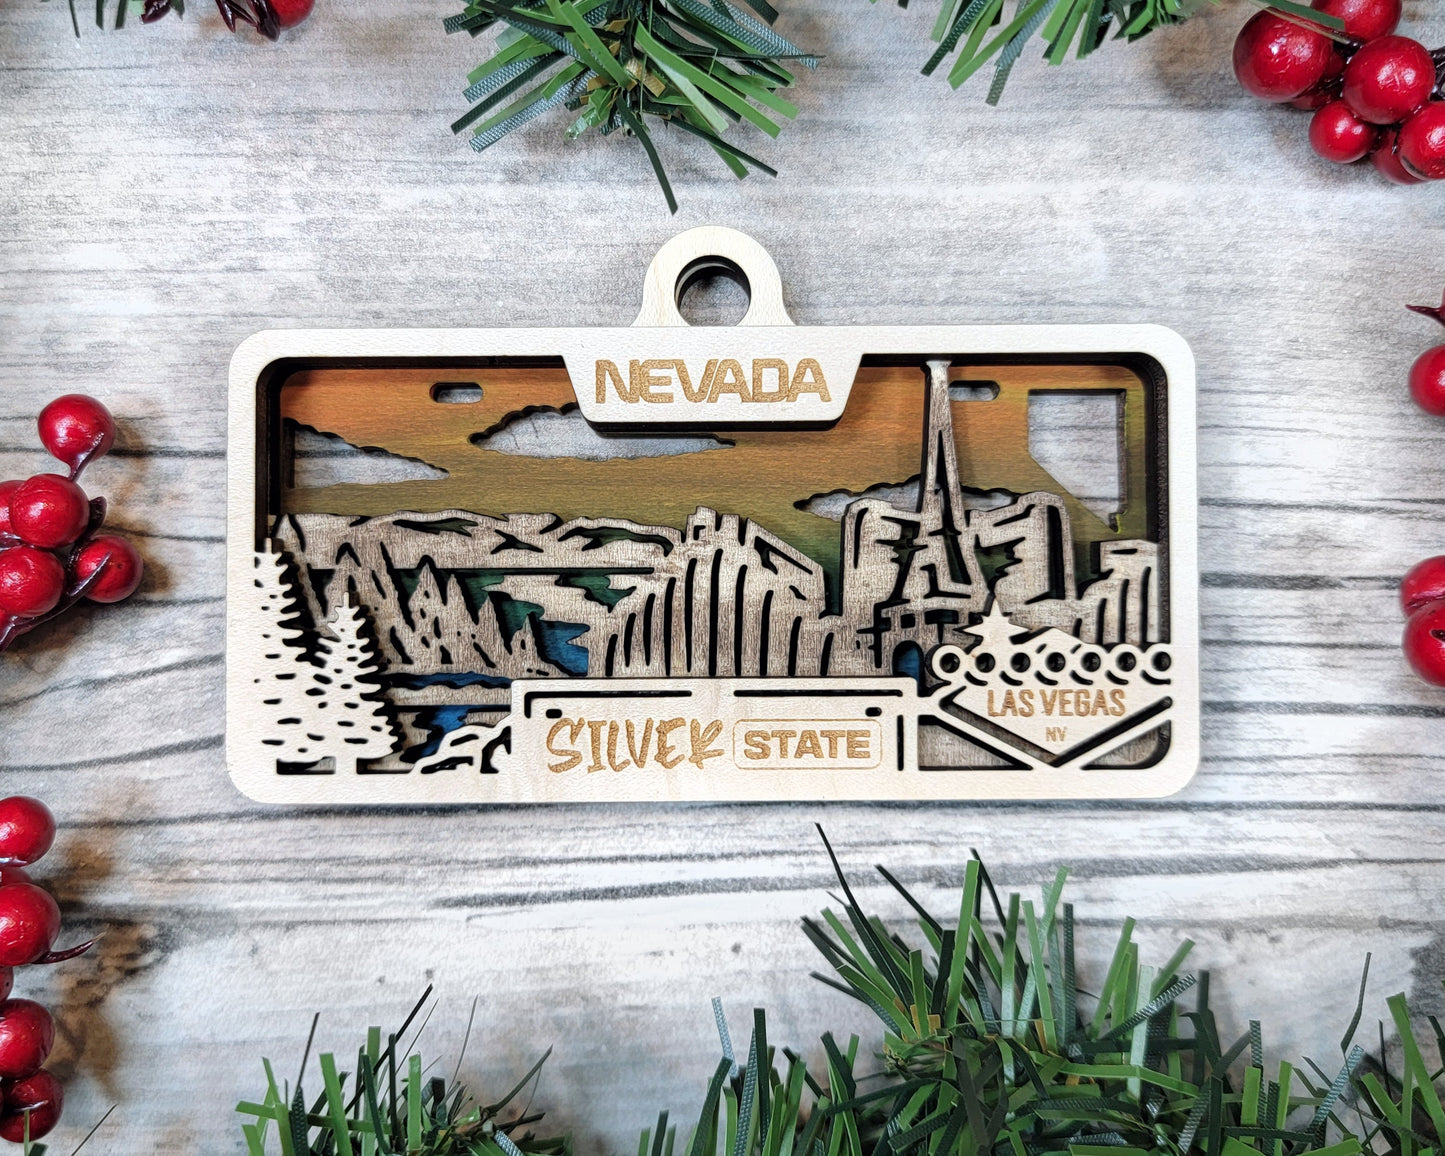 Nevada State Plate Ornament and Signage - SVG File Download - Sized for Glowforge - Laser Ready Digital Files